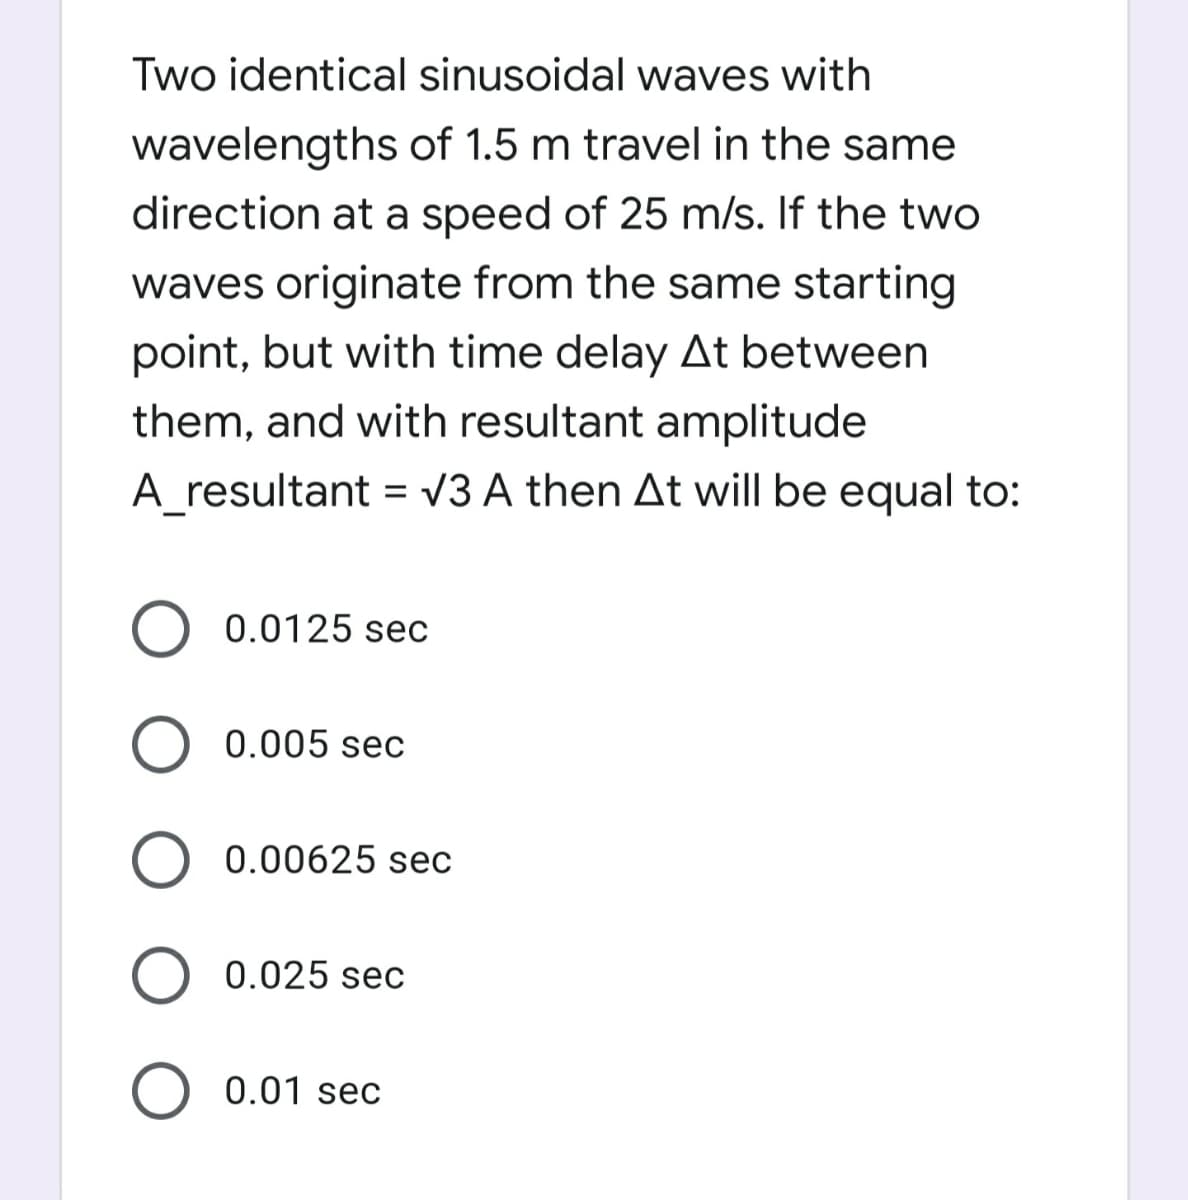 Two identical sinusoidal waves with
wavelengths of 1.5 m travel in the same
direction at a speed of 25 m/s. If the two
waves originate from the same starting
point, but with time delay At between
them, and with resultant amplitude
A_resultant = V3 A then At will be equal to:
0.0125 sec
O 0.005 sec
0.00625 sec
0.025 sec
0.01 sec
